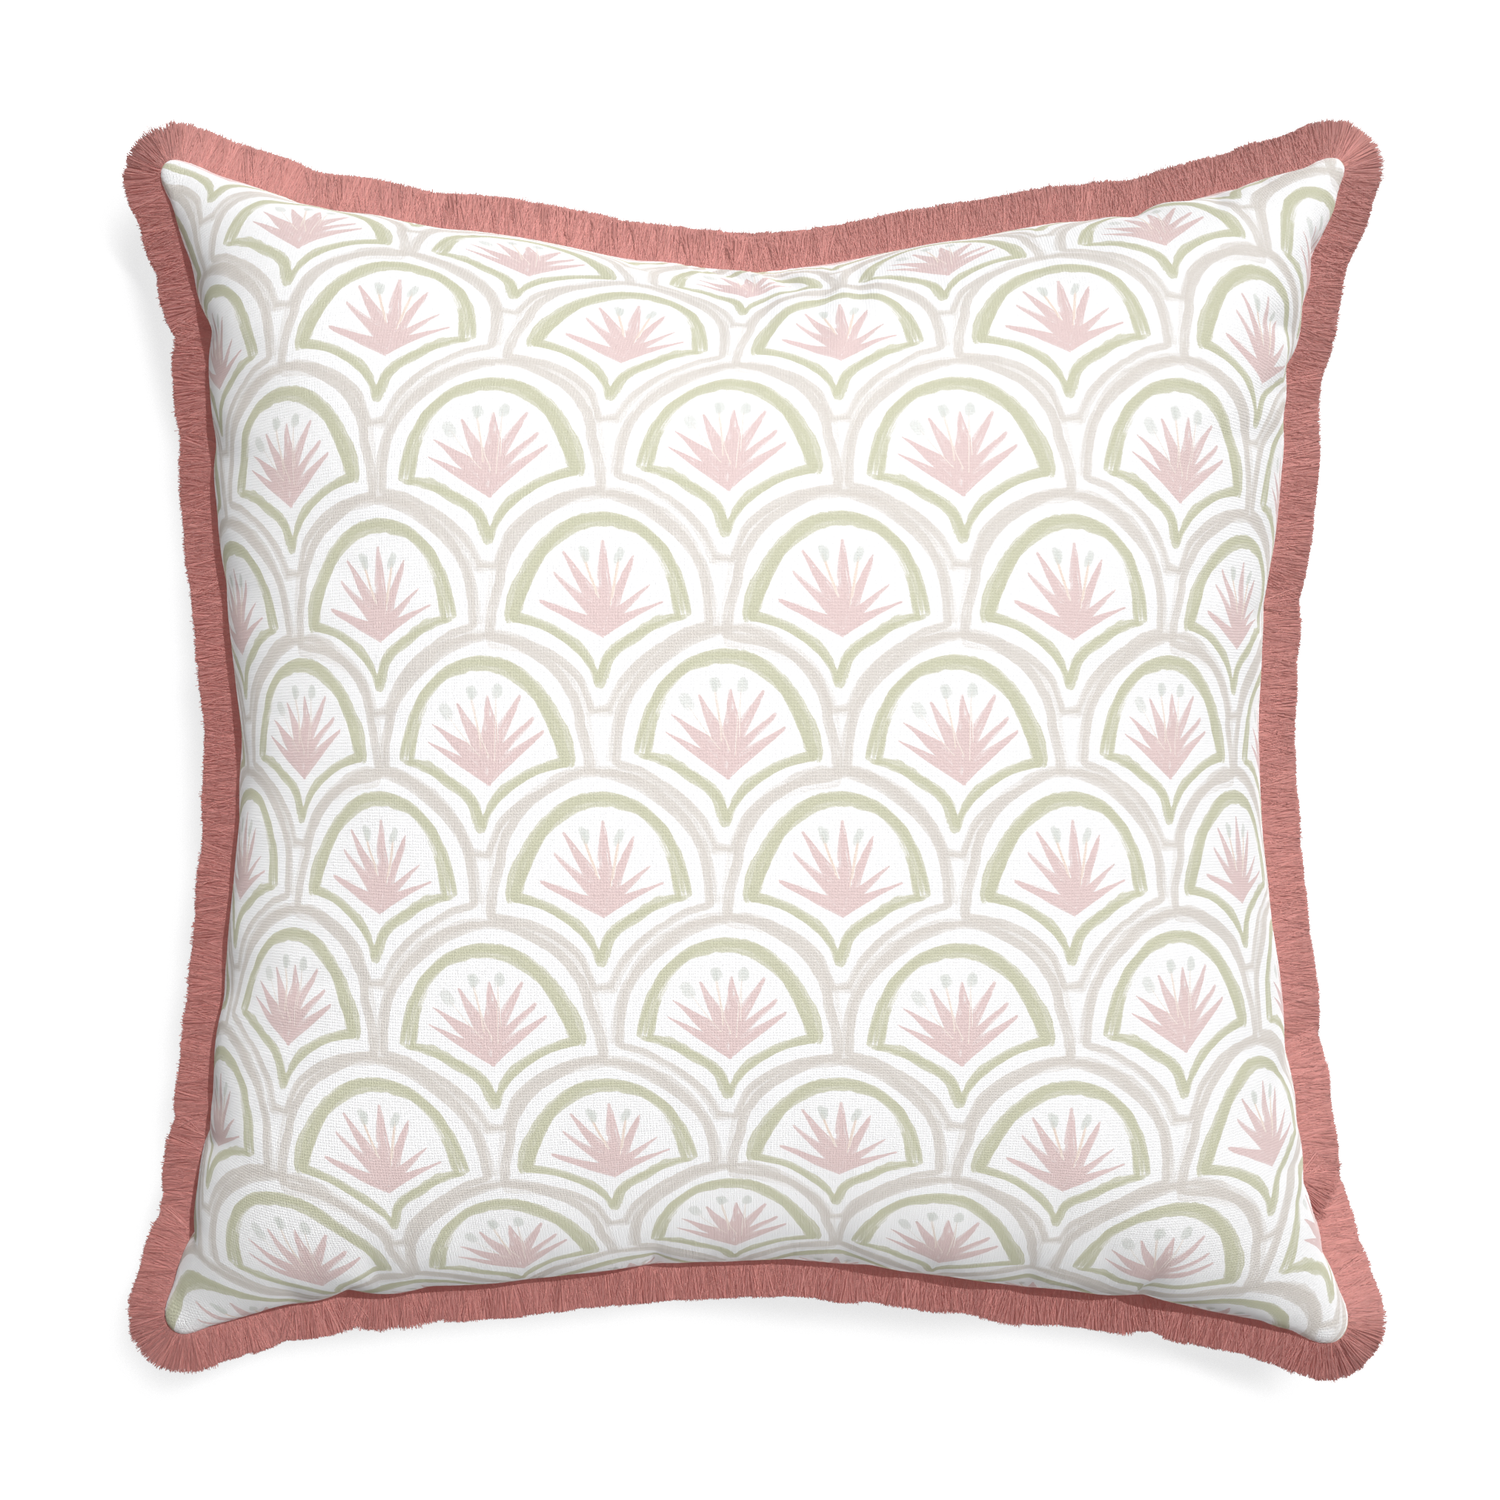 Euro-sham thatcher rose custom pink & green palmpillow with d fringe on white background